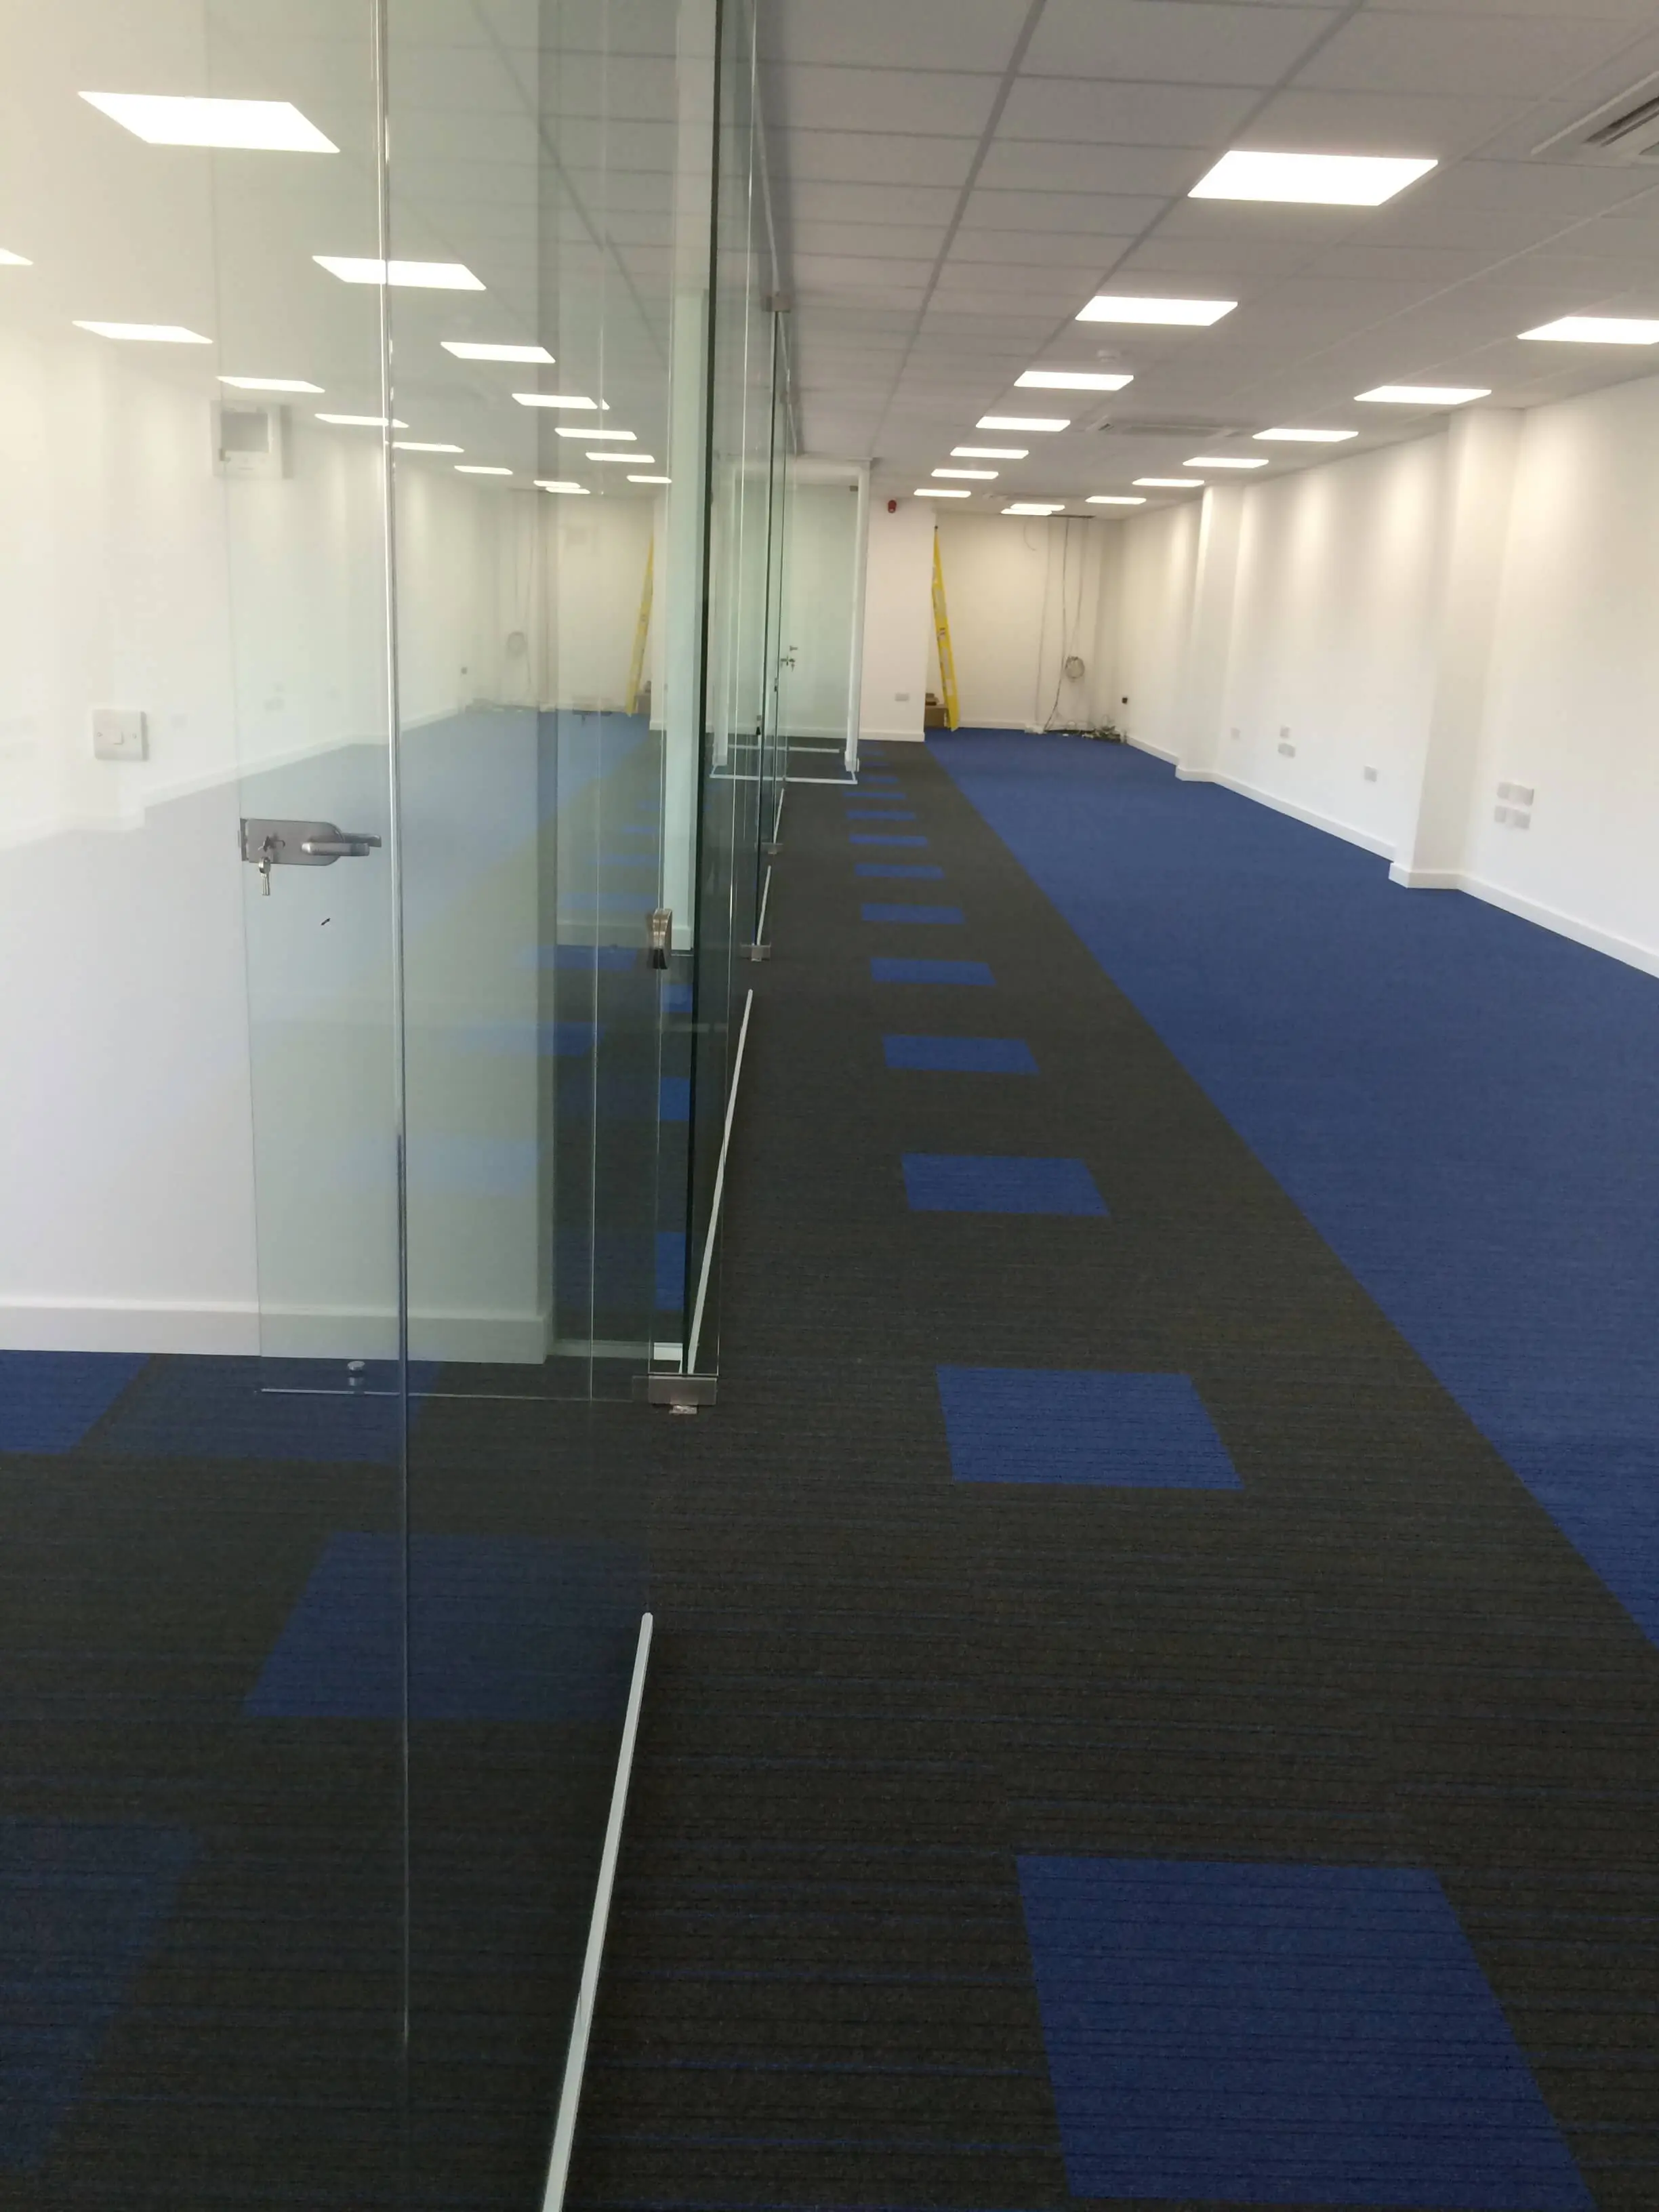 Large office space with glass partitions and lighting and designer floor